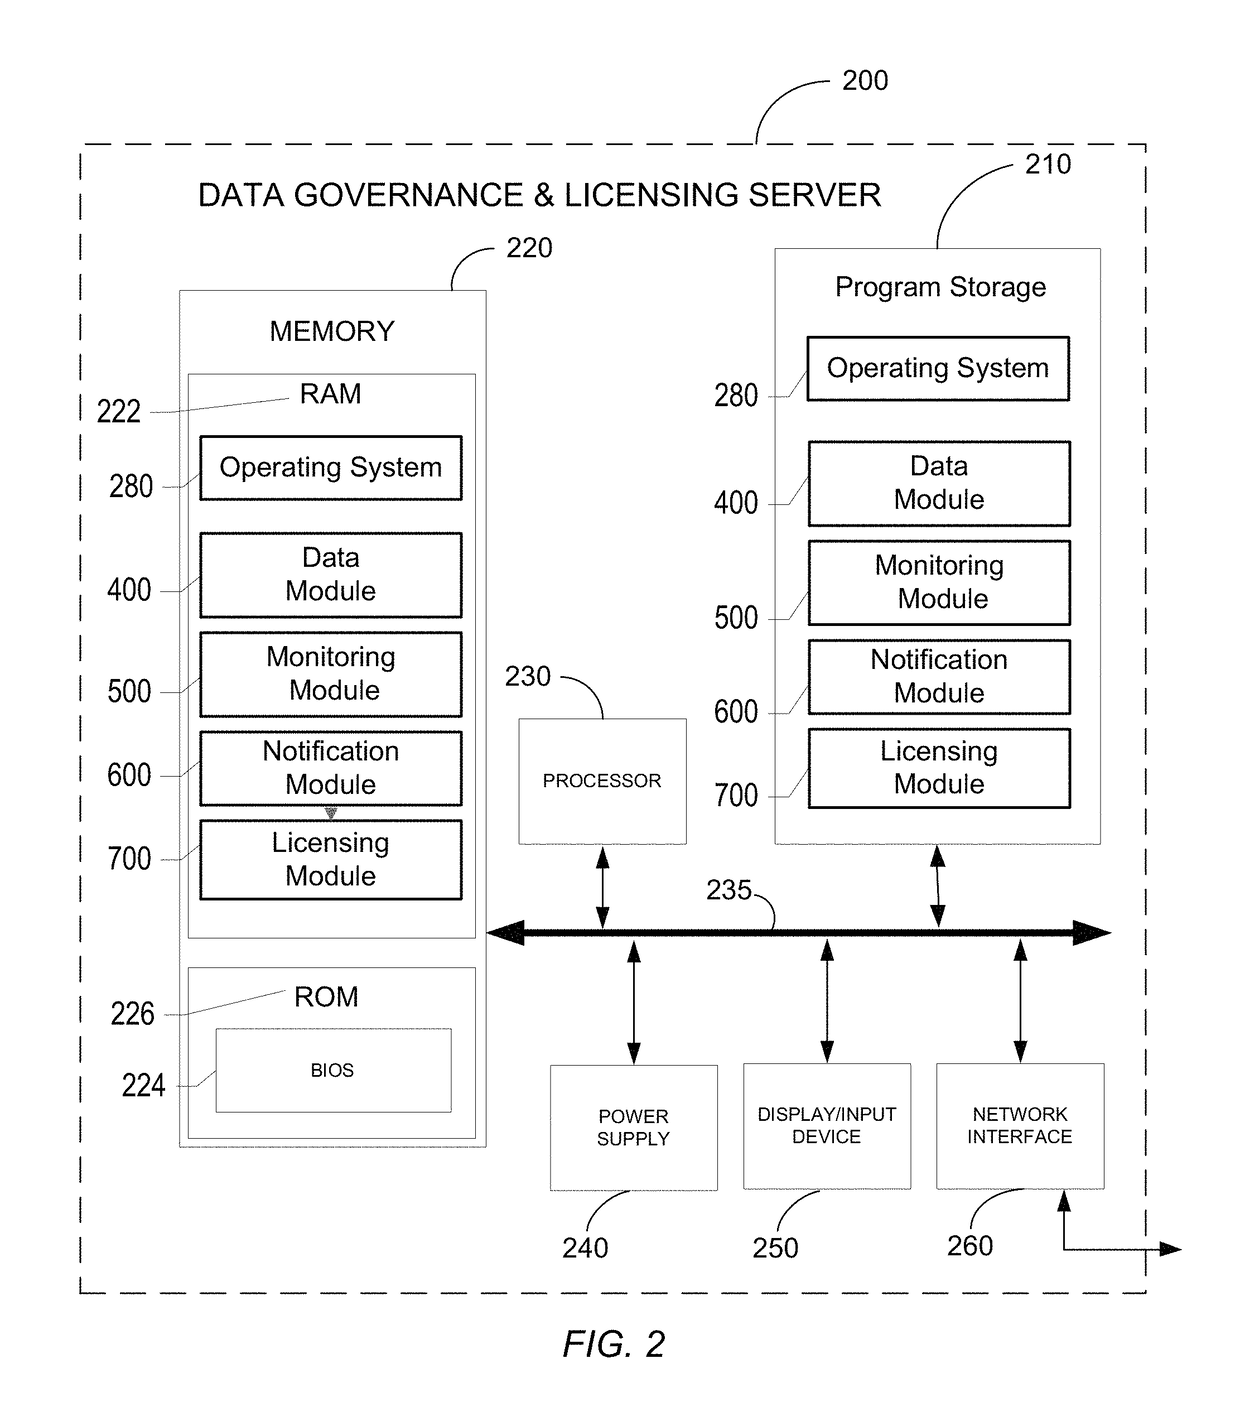 Systems, methods, and computer program products for data governance and licensing